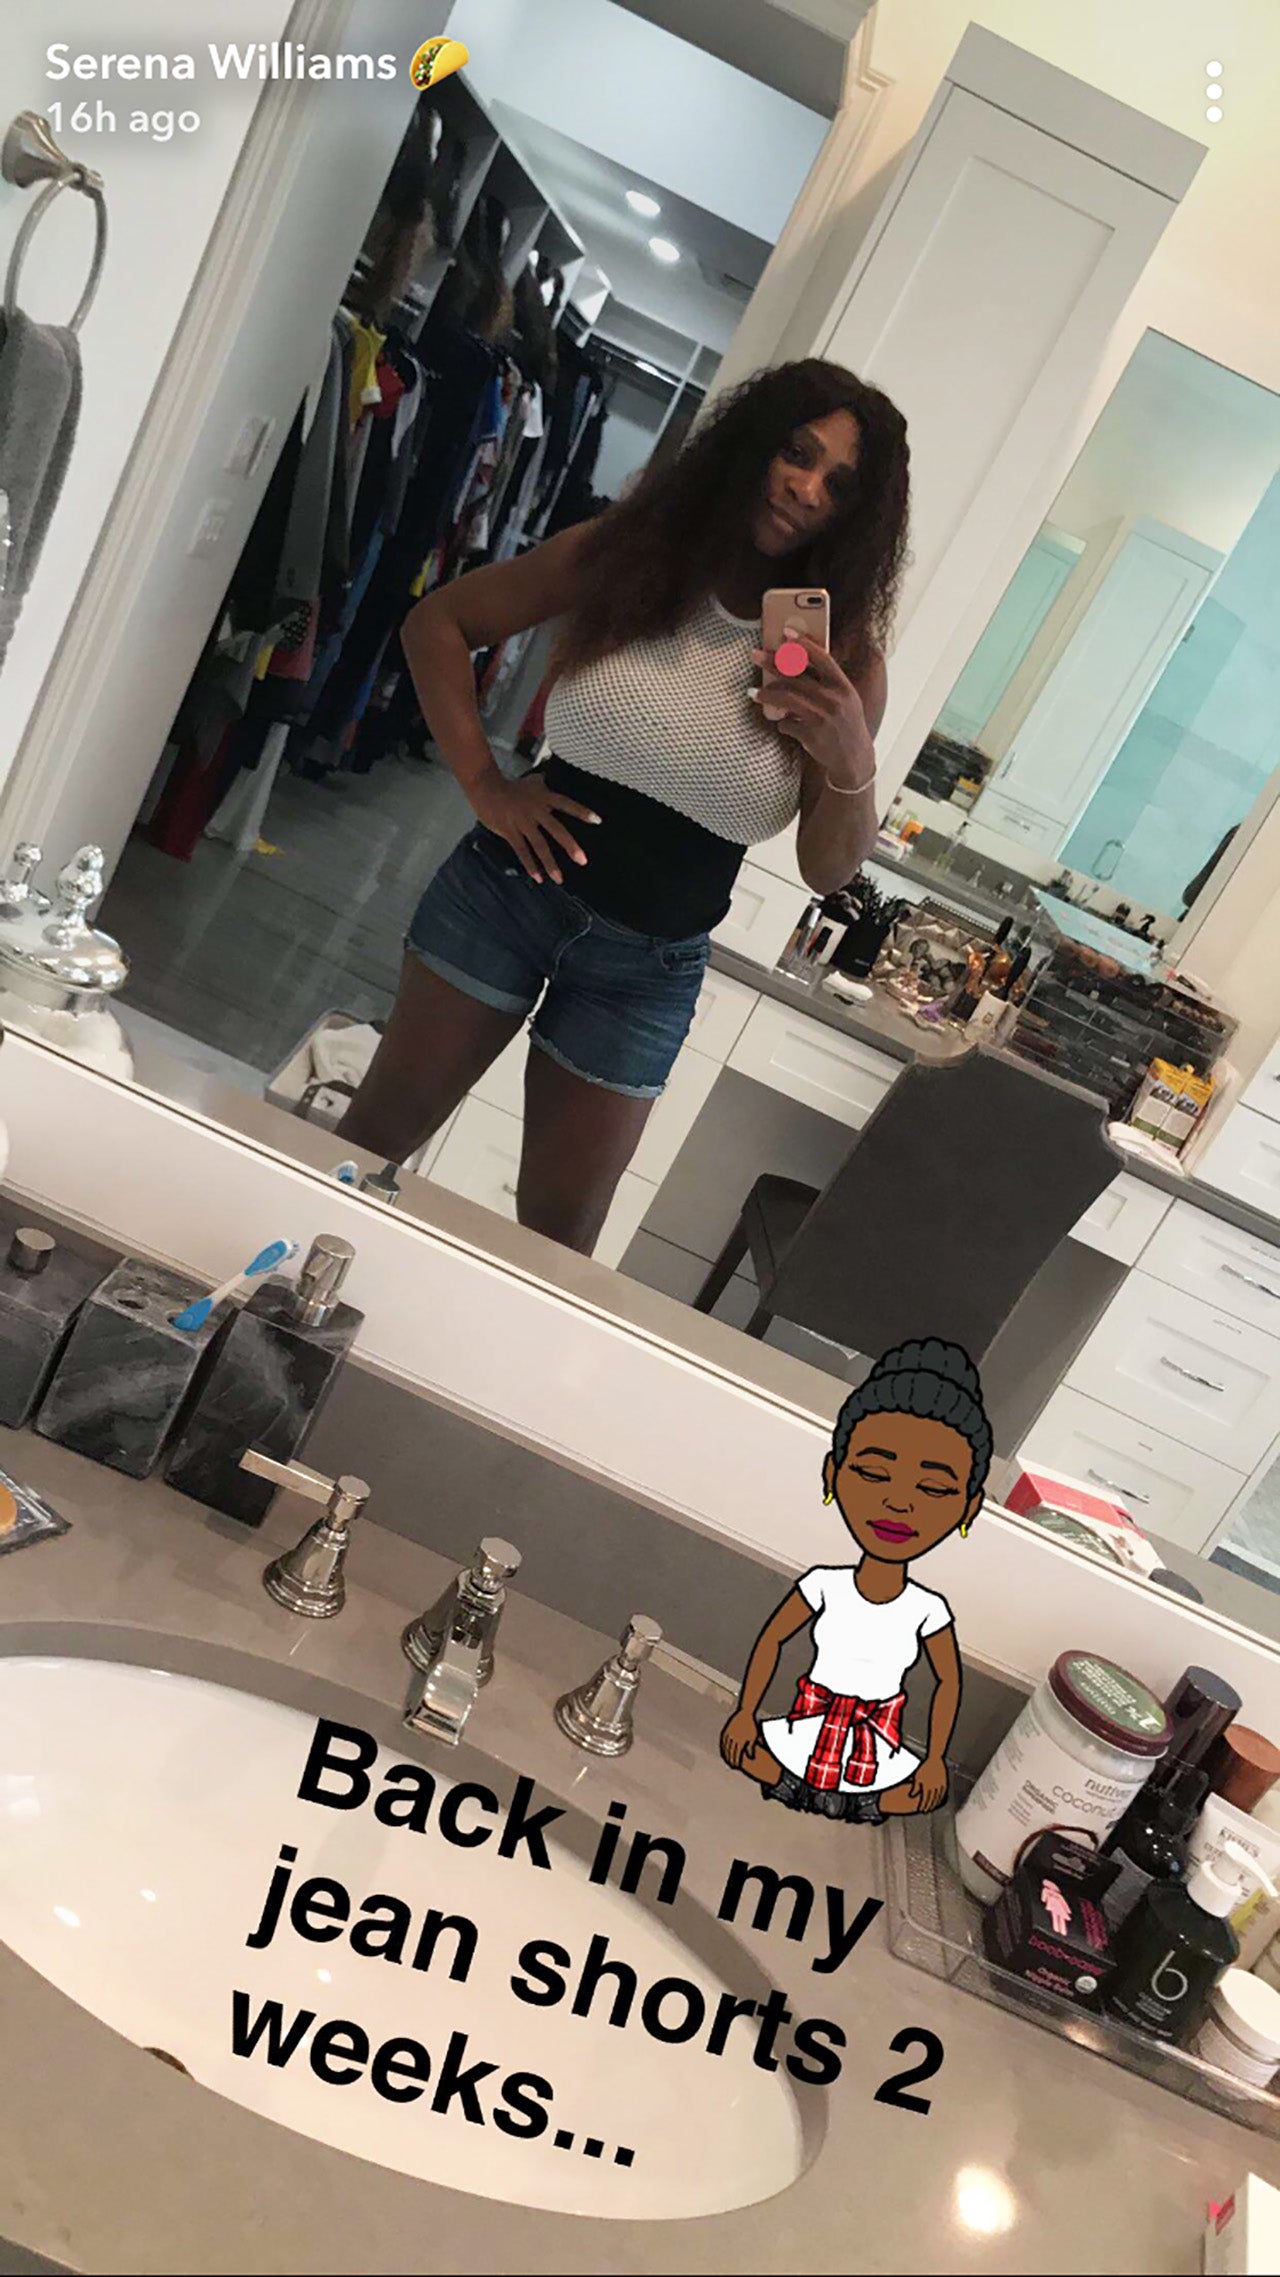 Serena Williams shows off post-baby weight loss as she slips back into jean shorts 2 ...